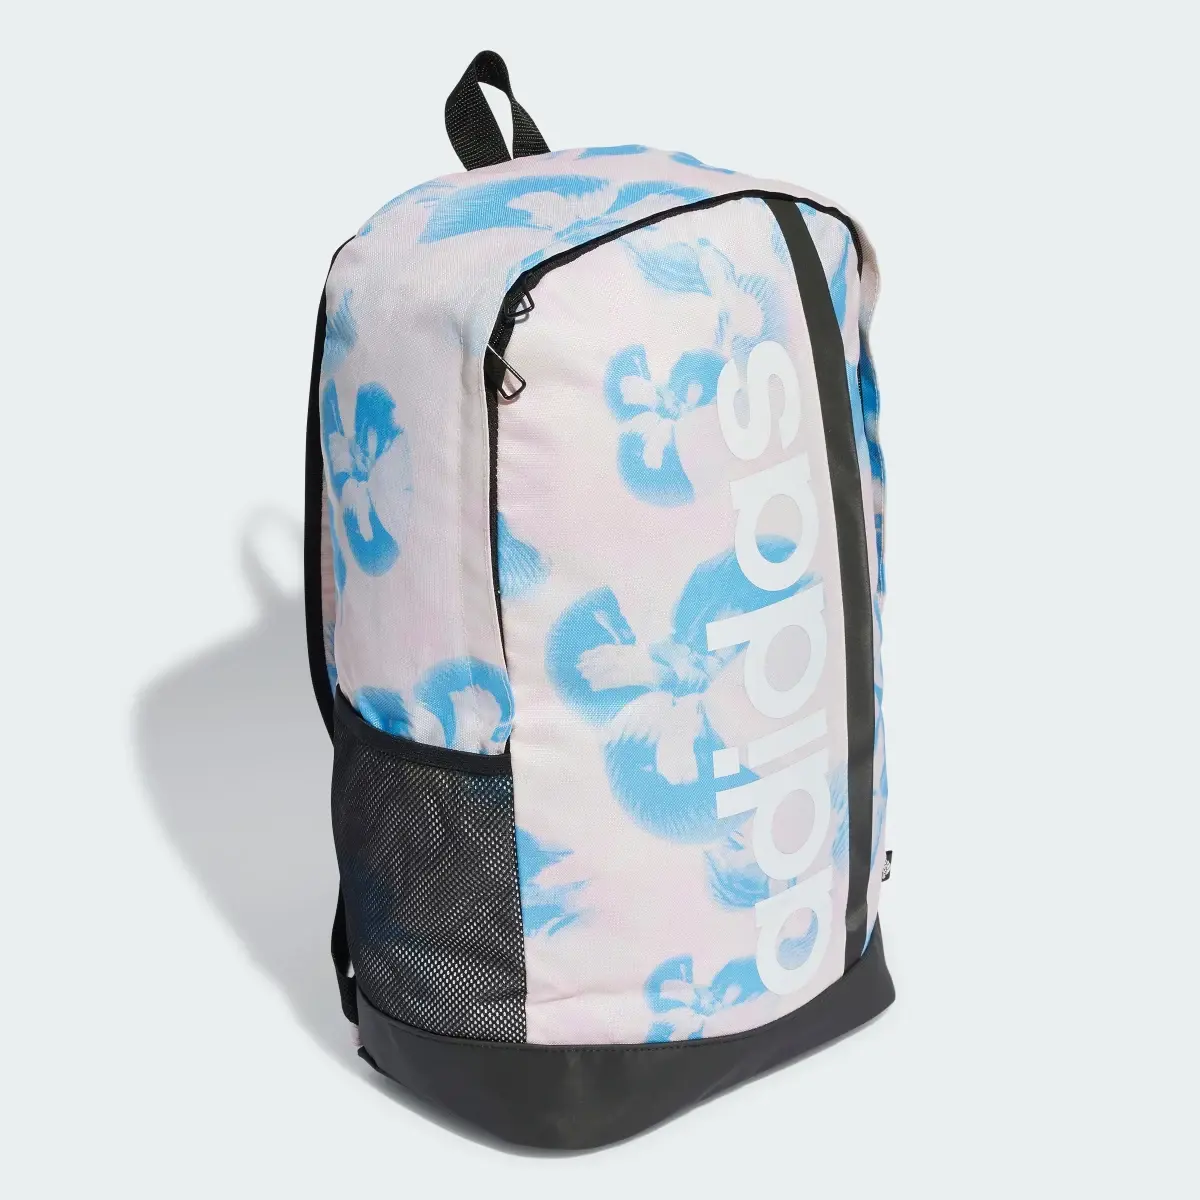 Adidas Linear Graphic Backpack. 2